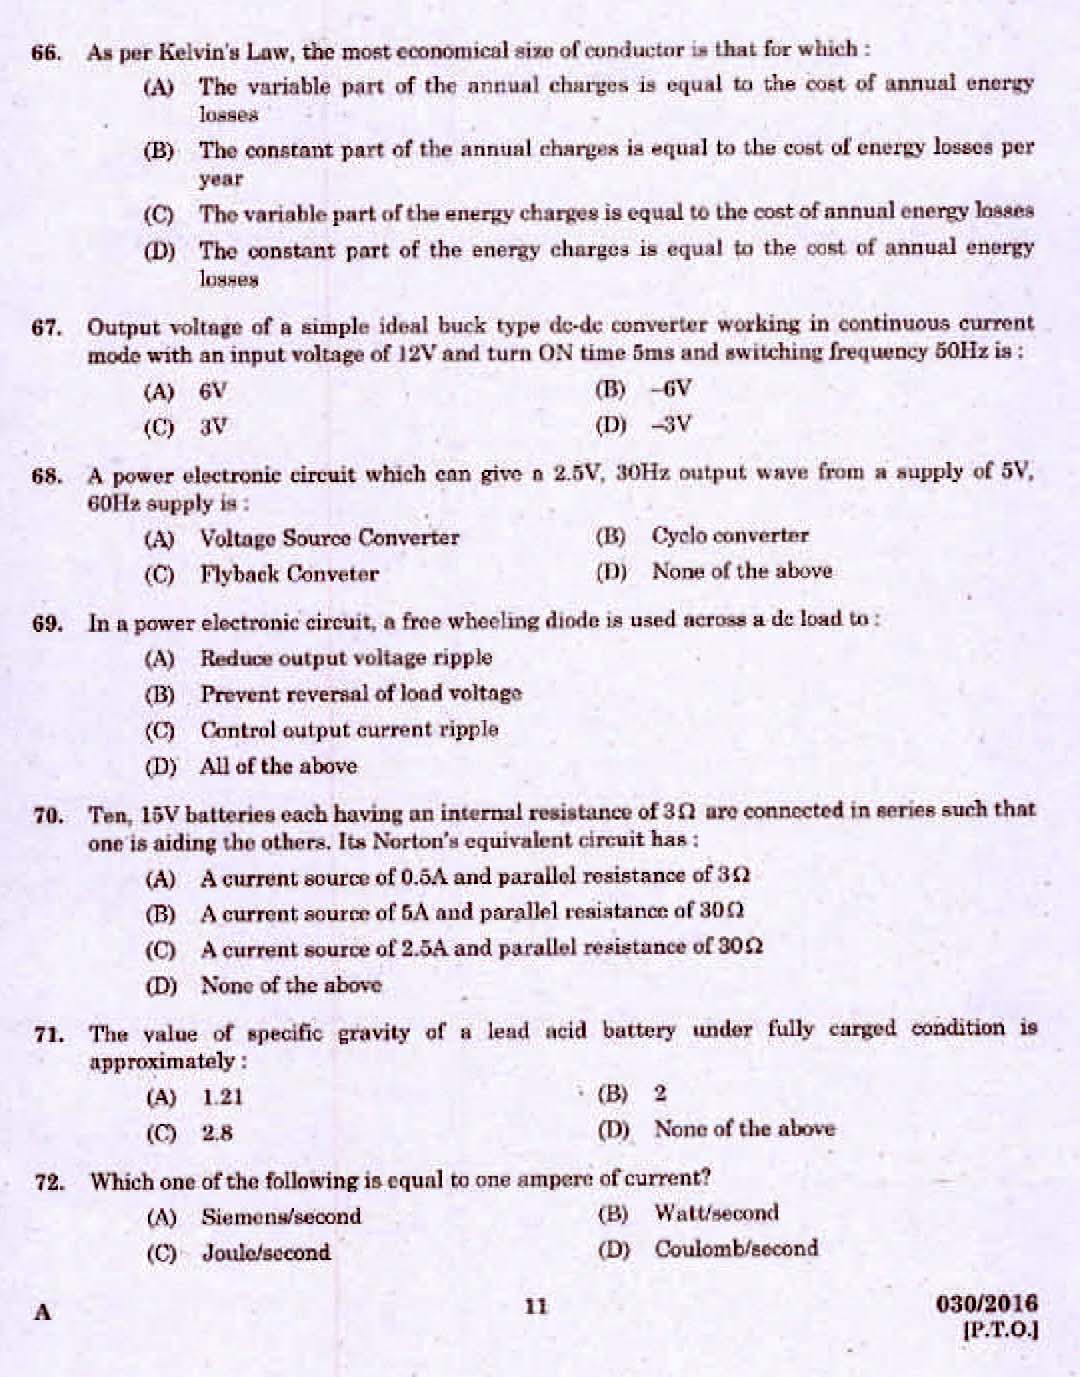 Kerala PSC Assistant Engineer Electrical Exam 2016 Question Paper Code 0302016 9